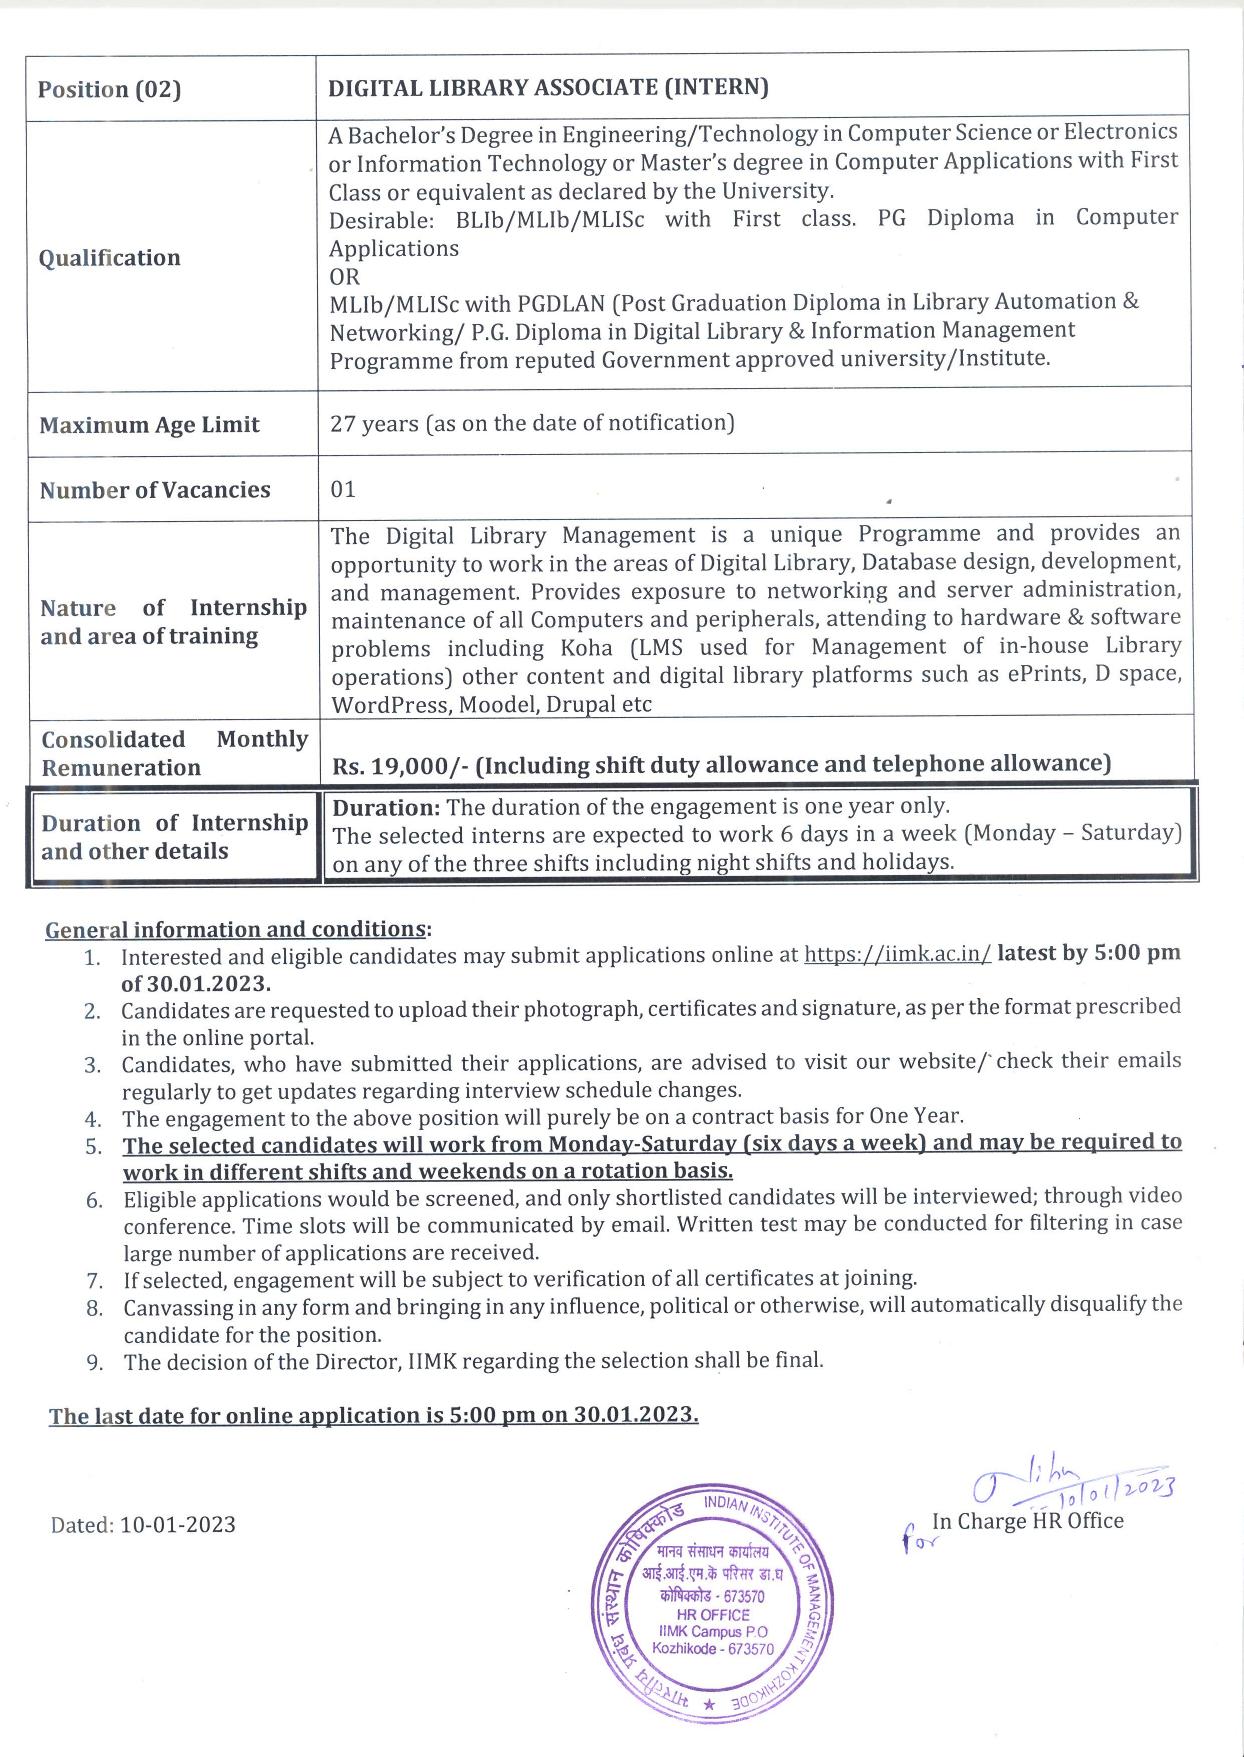 Indian Institute of Management Kozhikode Invites Application for Library and Information Associate, Digital Library Associate Recruitment 2023 - Page 1